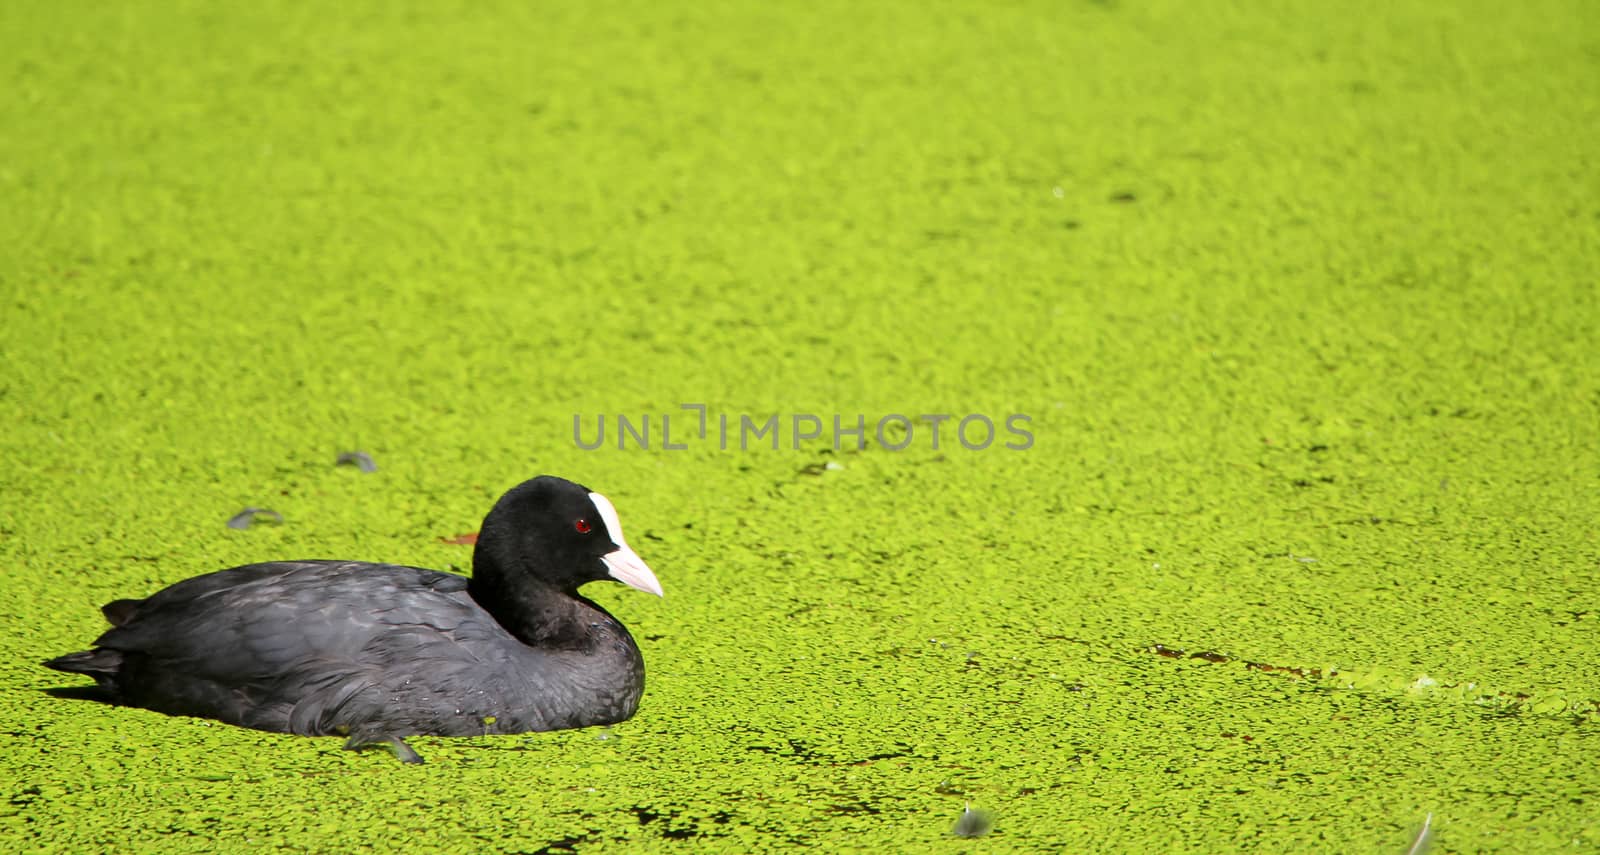 Black coot with a white beak in a green lake with duckweed on the surface.